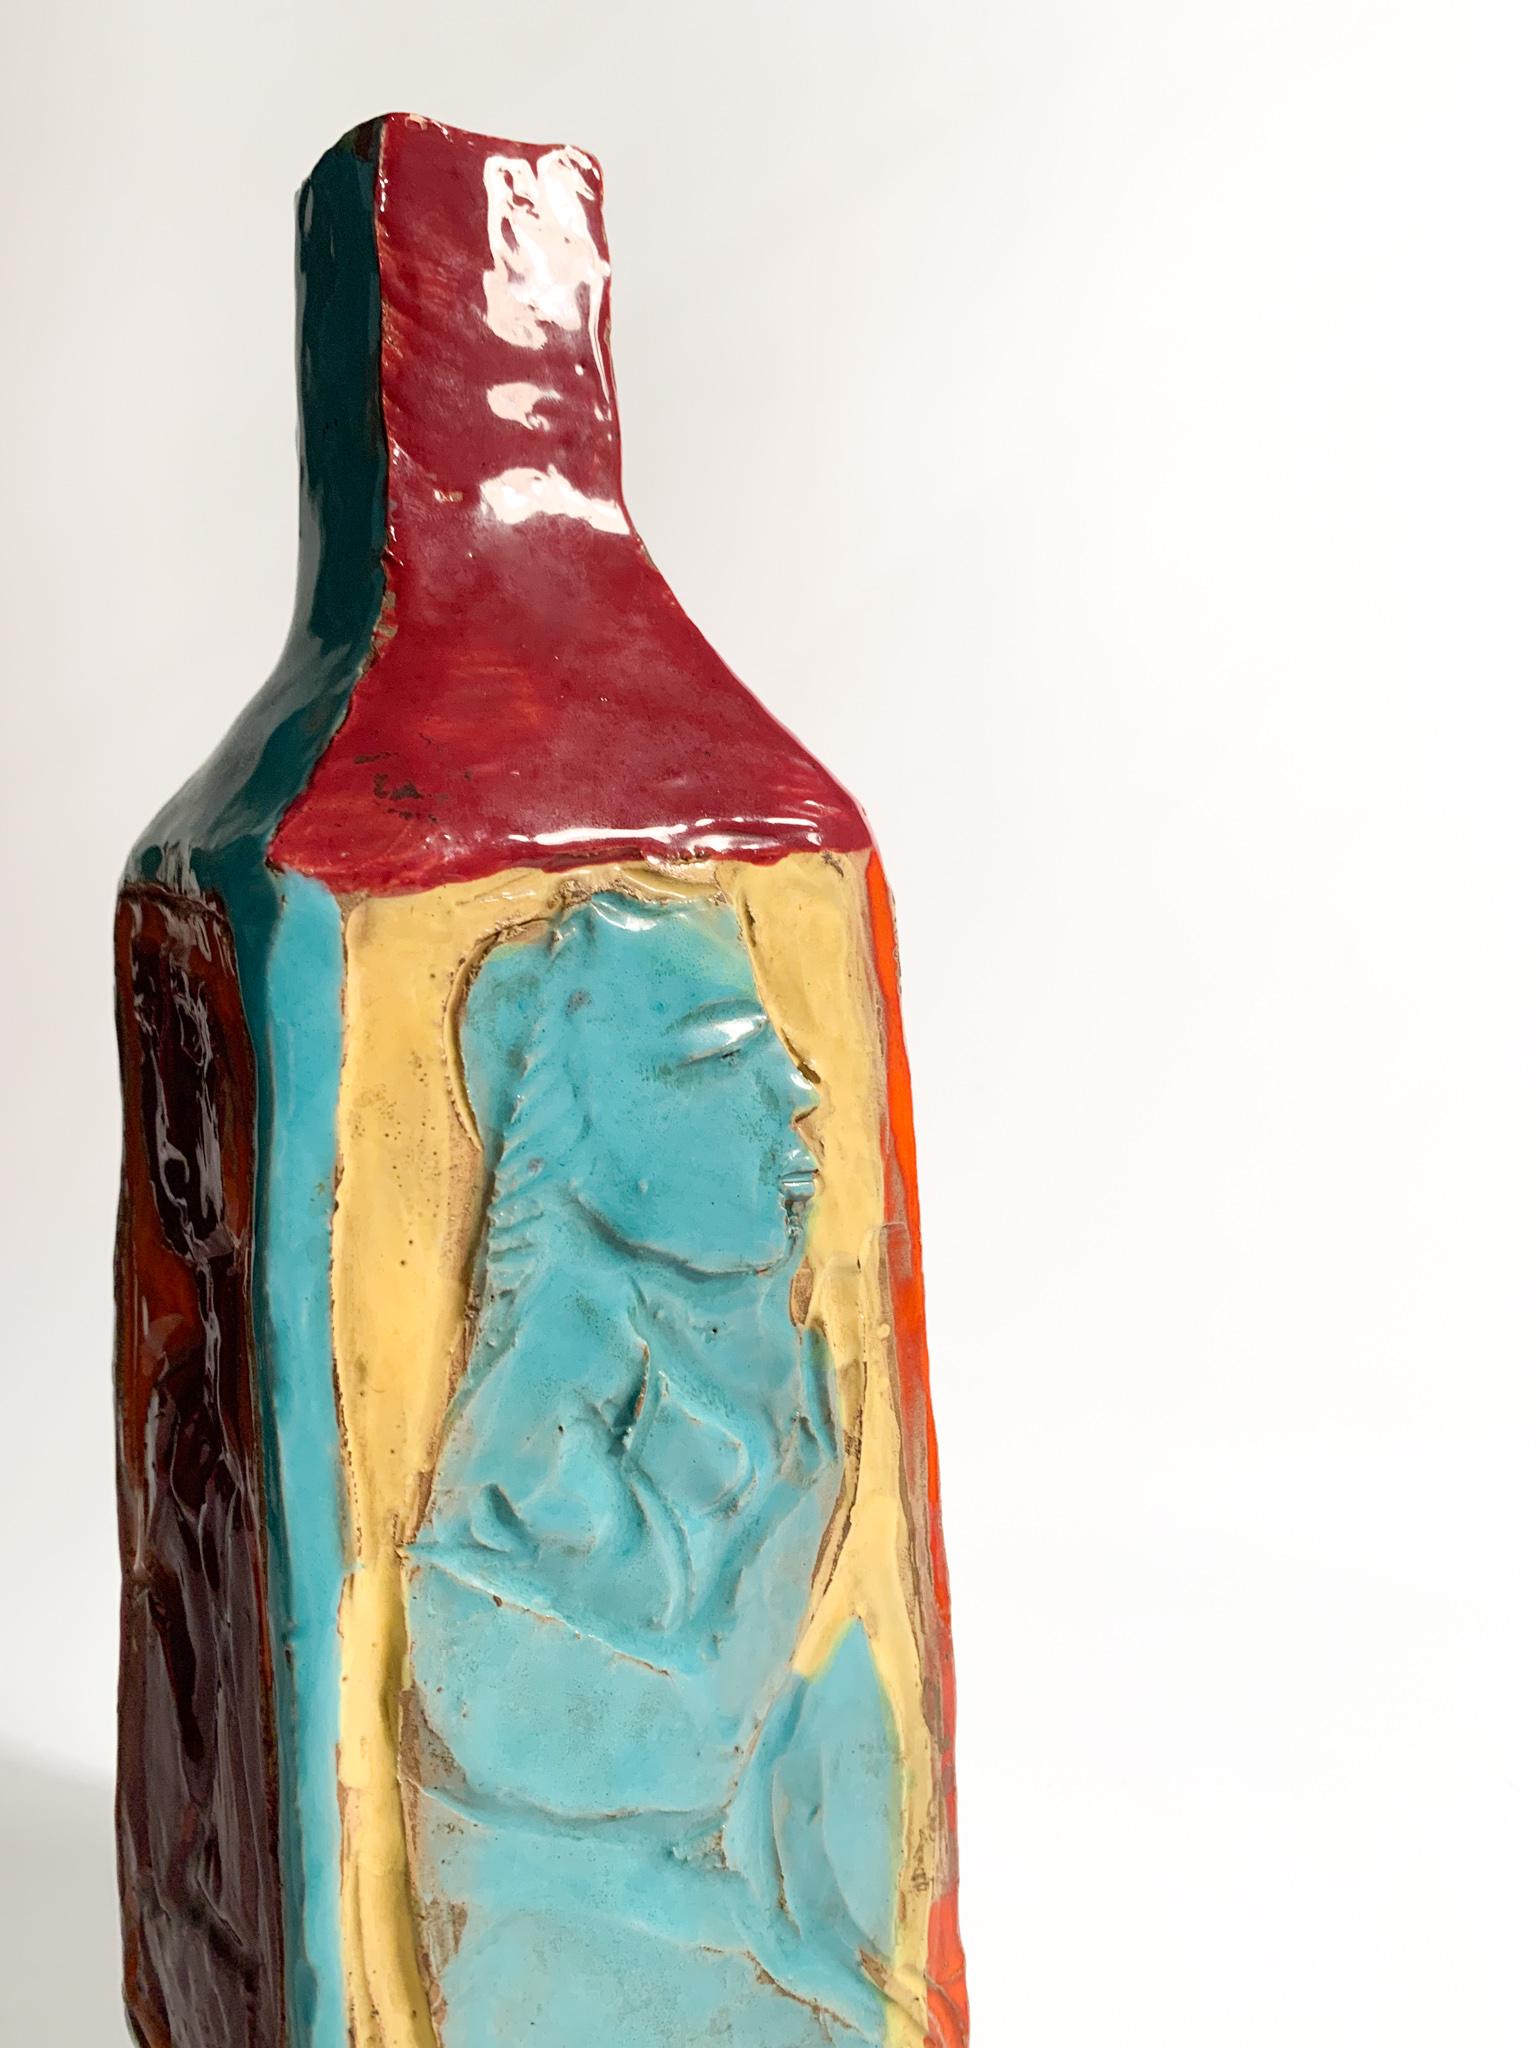 Multicolored Ceramic Vase Attributed to the Cantagalli Manufacture in the 1950s For Sale 7